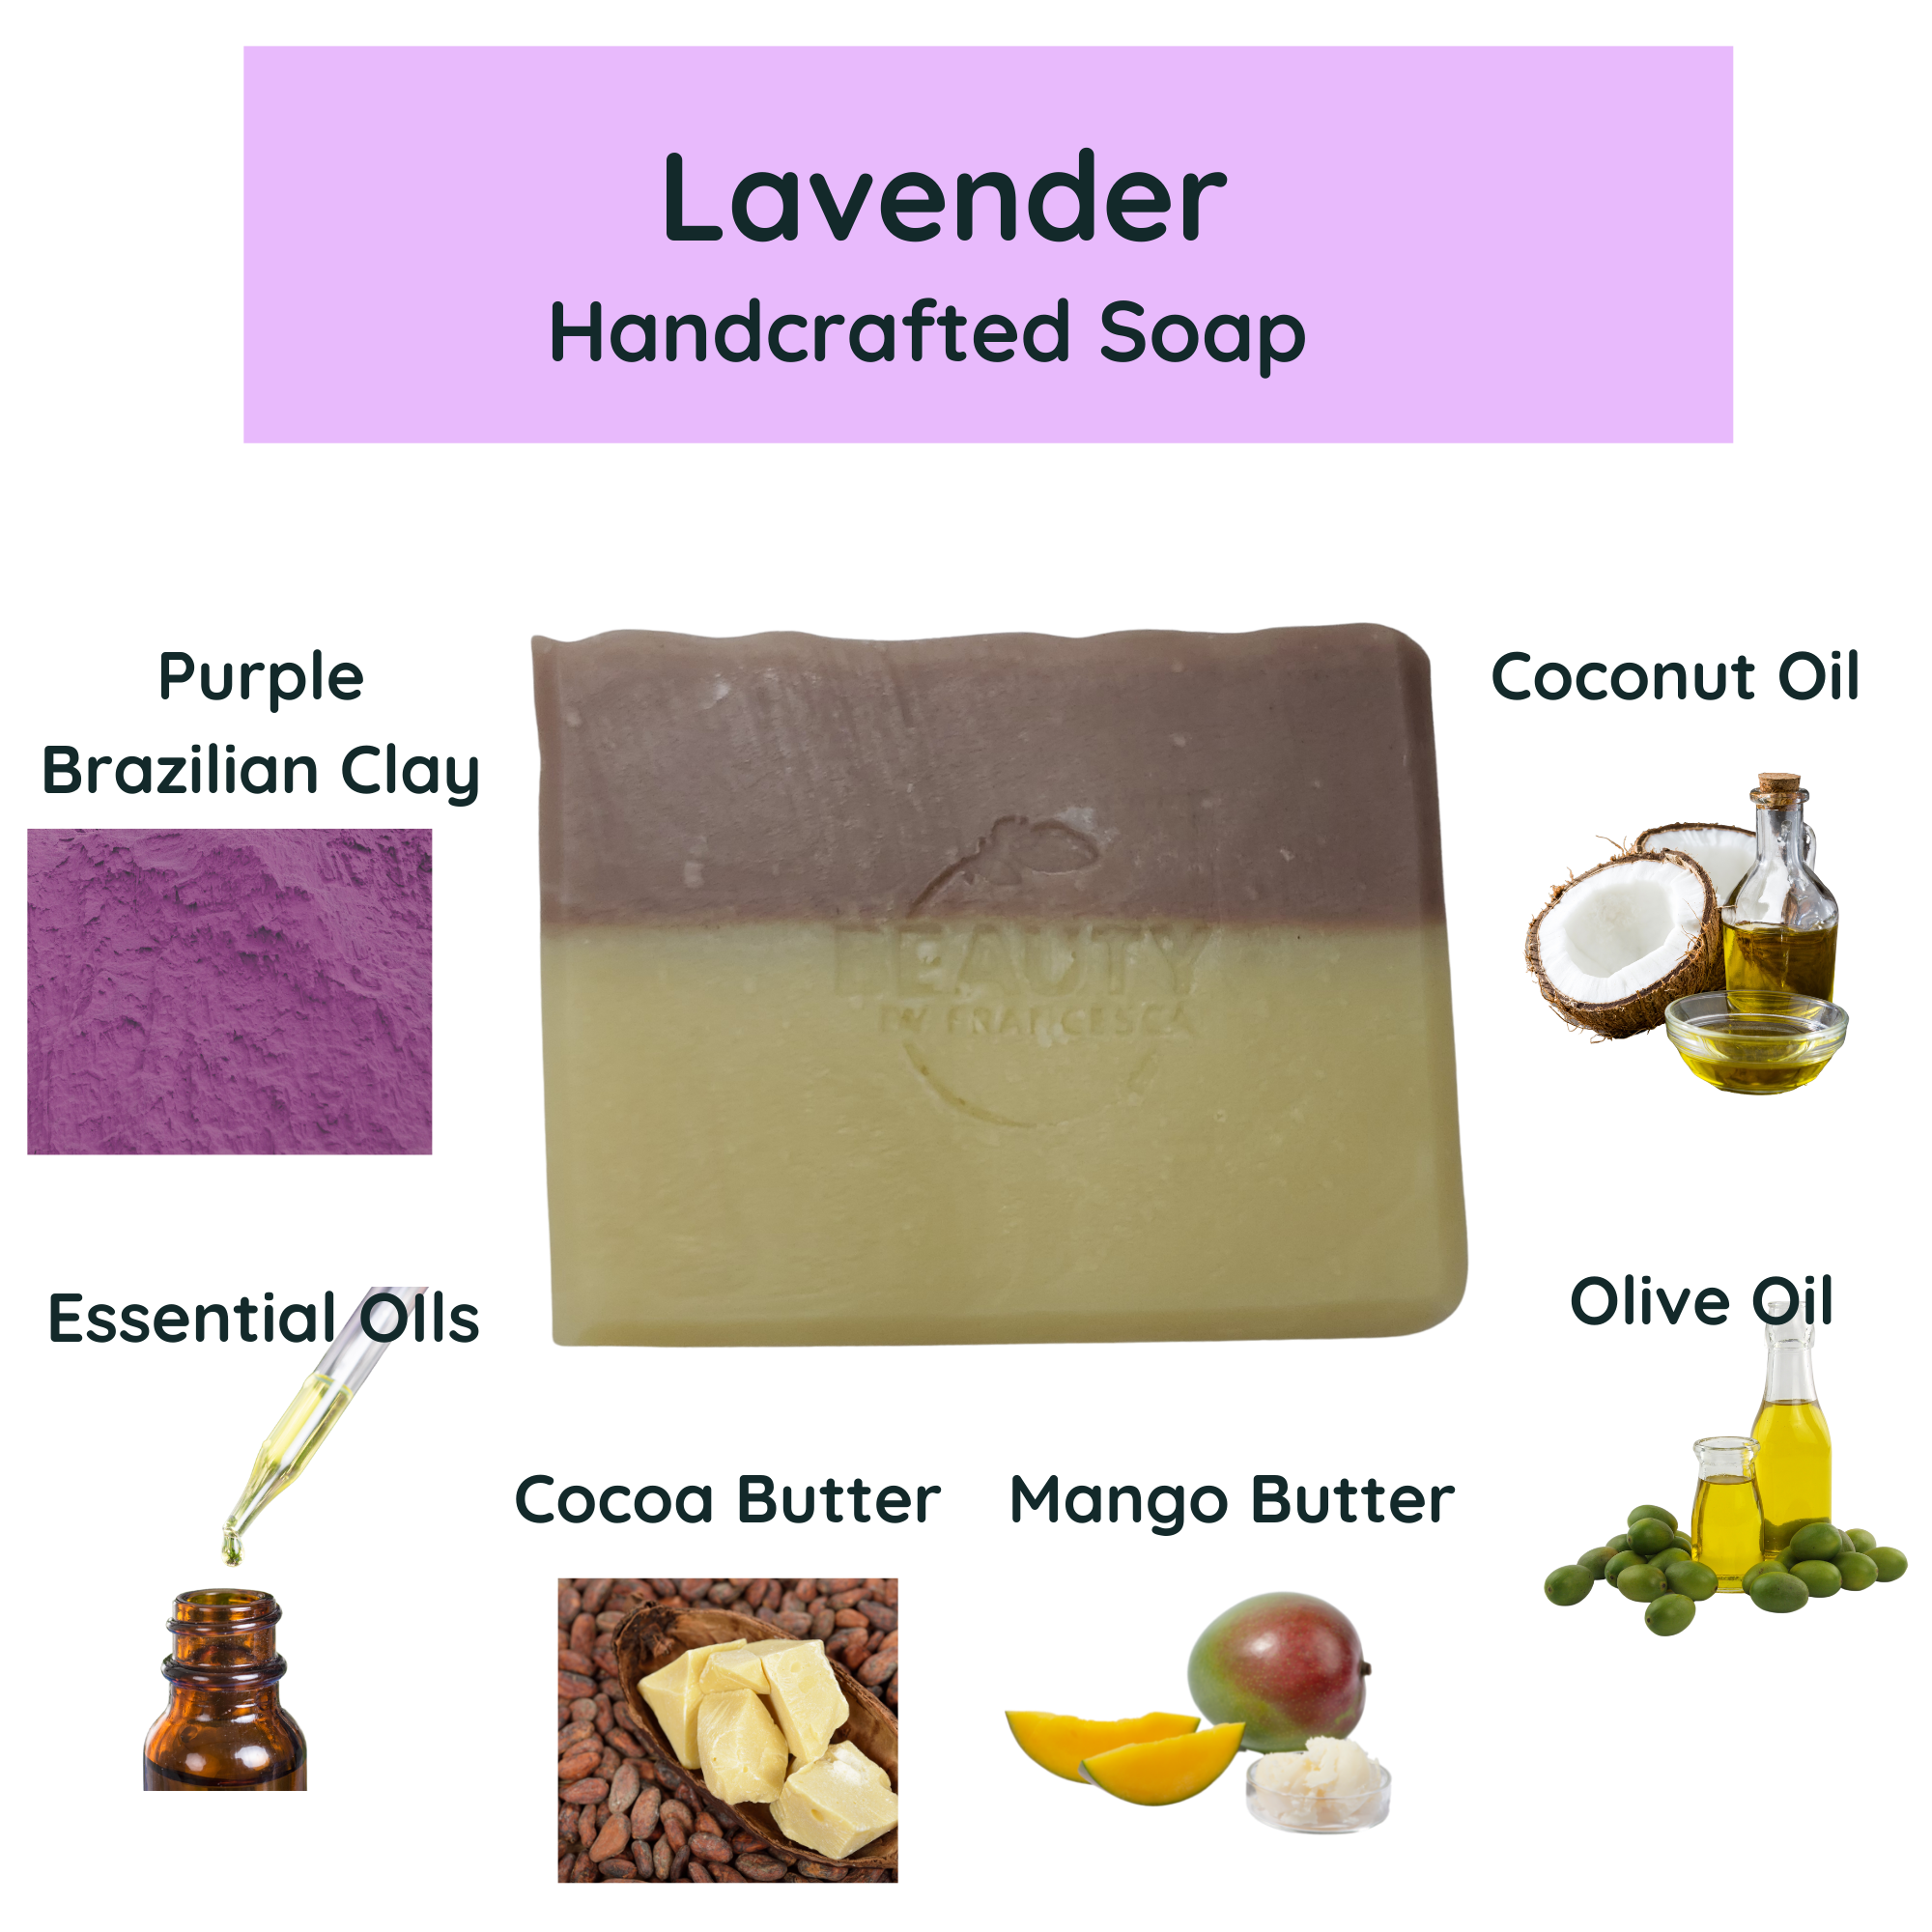 Lavender handcrafted soap ingredients purple Brazilian clay essential oils mango butter coconut oil and more